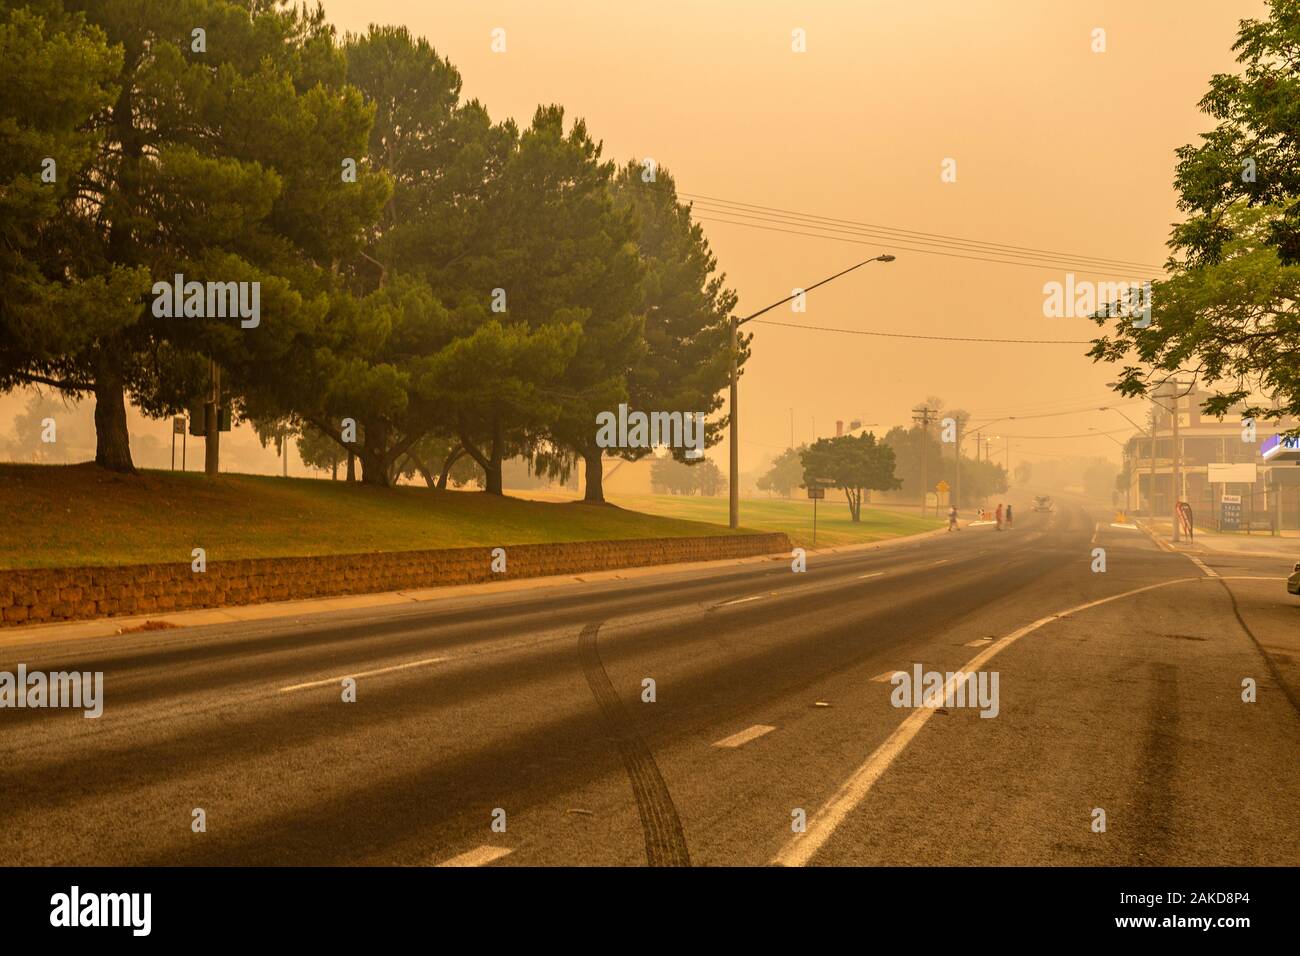 View of the town of Narrandera in New South Wales covered by thick smoke from the bushfires some 300 km away near Canberra. Stock Photo